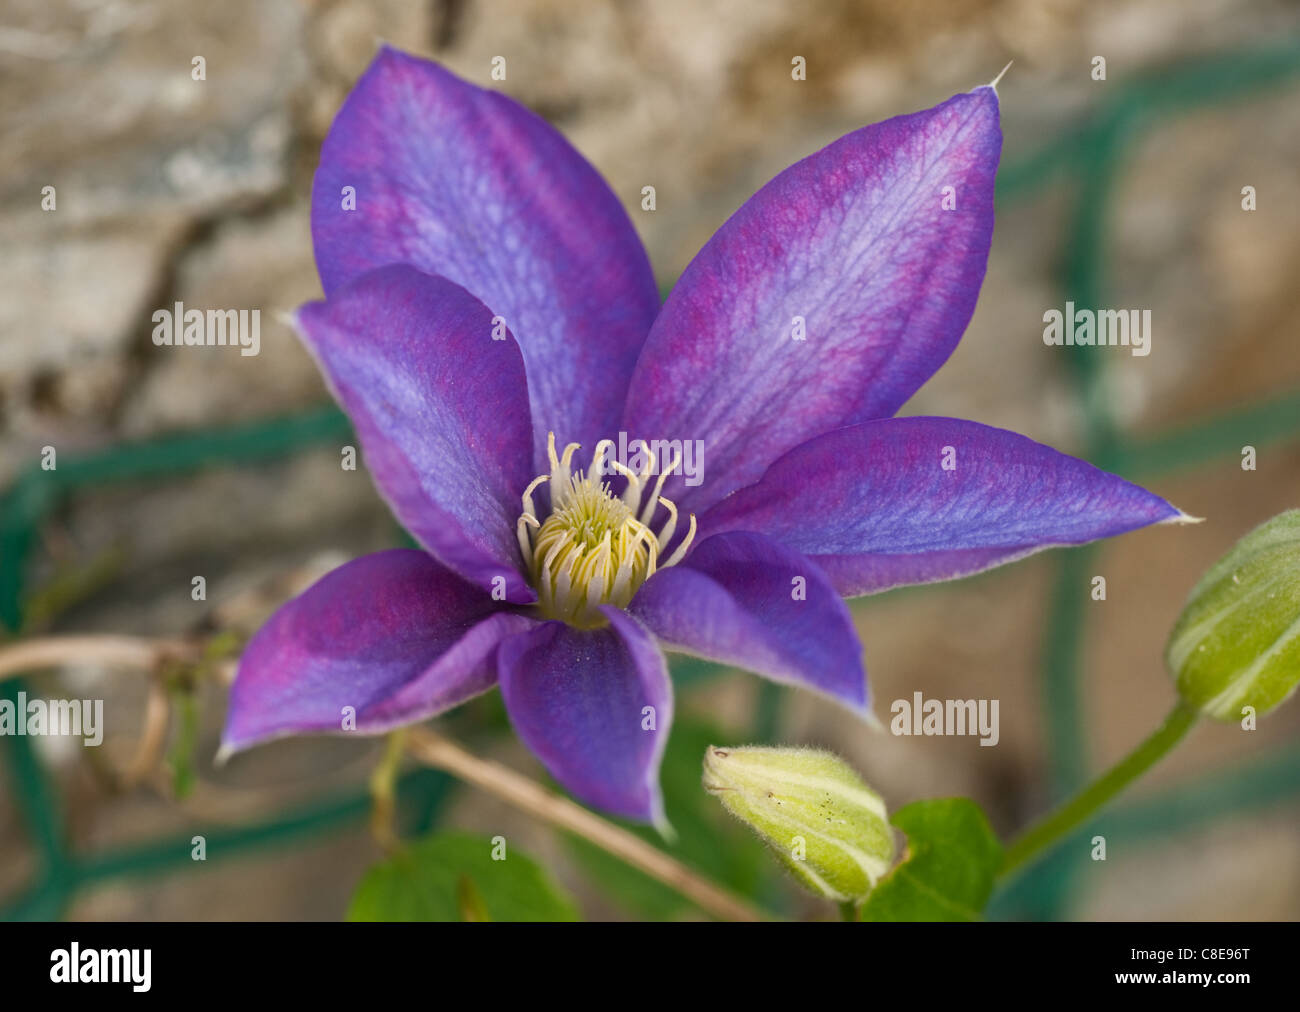 A purple Clematis flower Stock Photo